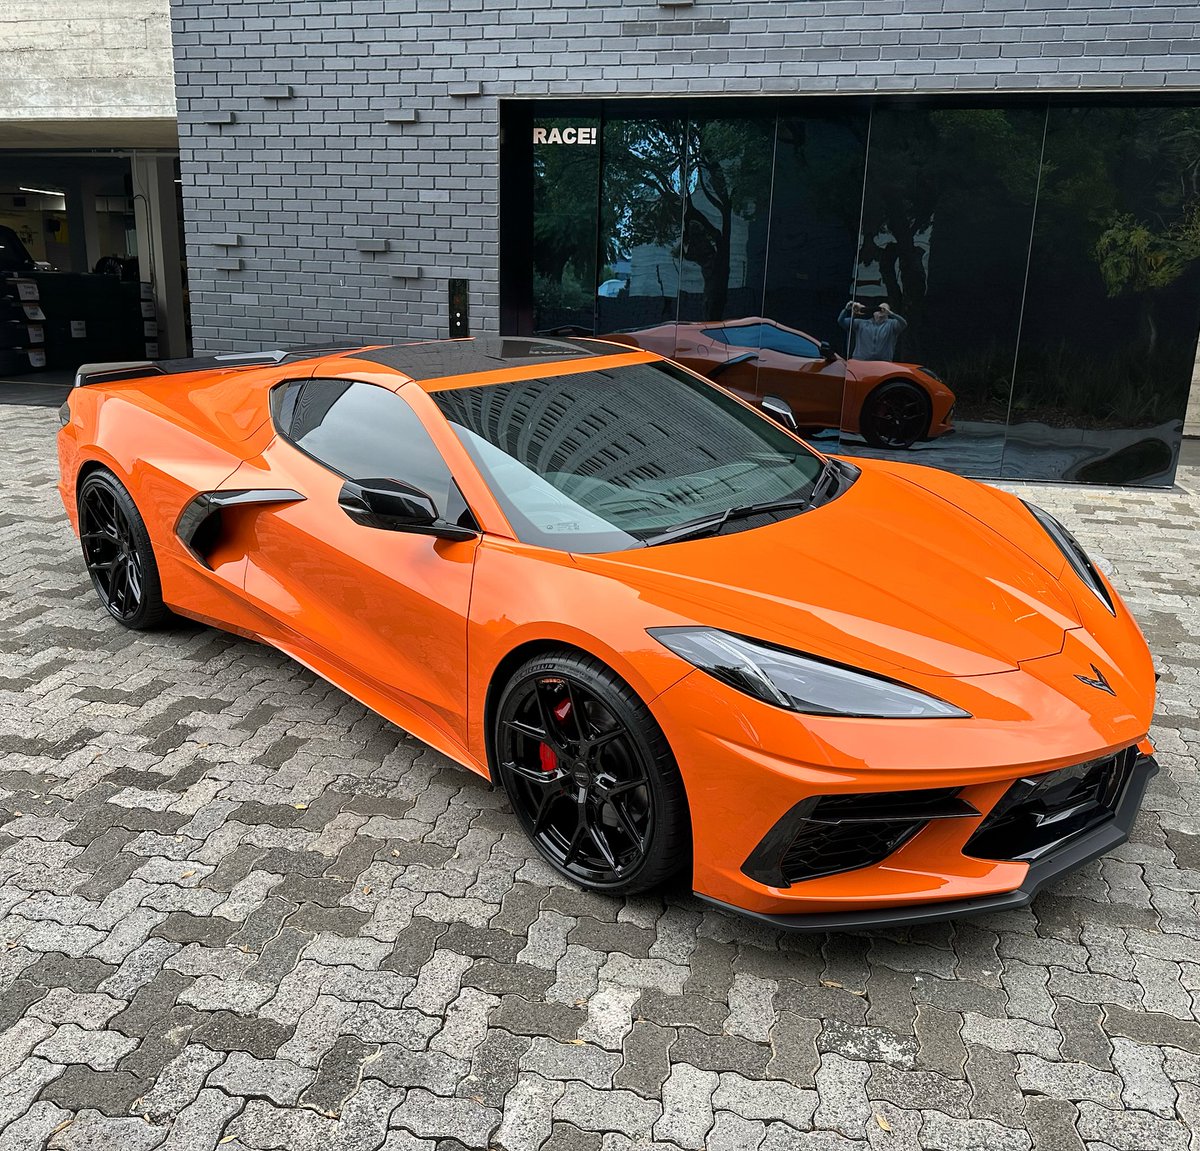 Another C8 Corvette has arrived in South Africa.

This one is finished in Amplify Orange Tintcoat and has been fitted with Vossen wheels and some tinting done by @RACE1SA